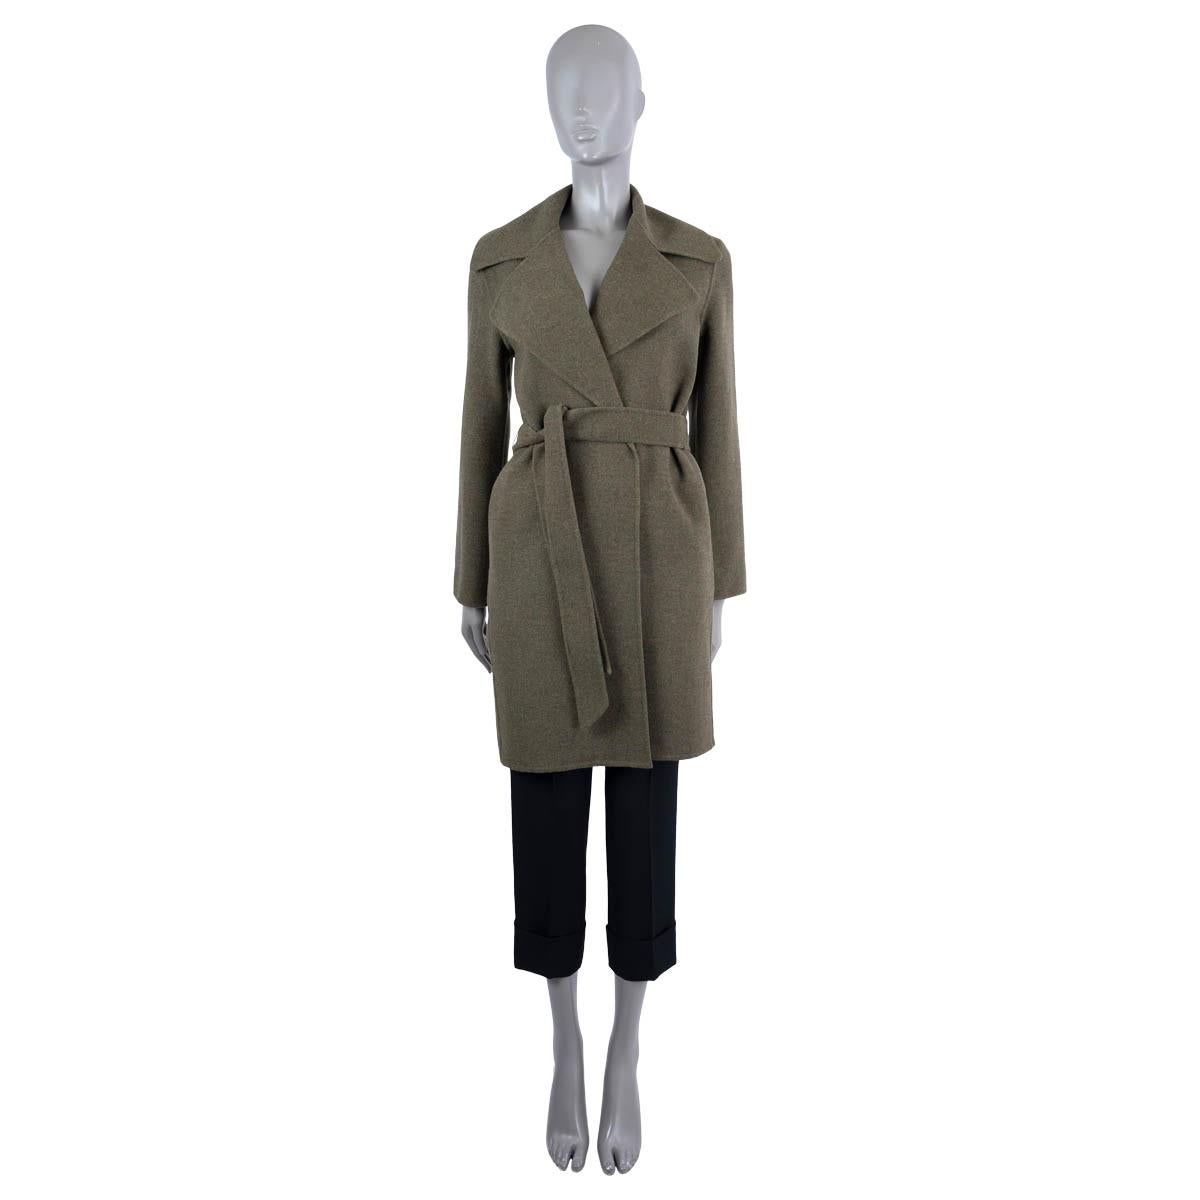 100% authentic Ralph Lauren Collection Cameo wrap coat in military green wool (with 10% cashmere). Closes with a self-tie belt and is unlined. Has been worn and is in excellent condition.

Measurements
Tag Size	0
Size	XS
Shoulder Width	44cm